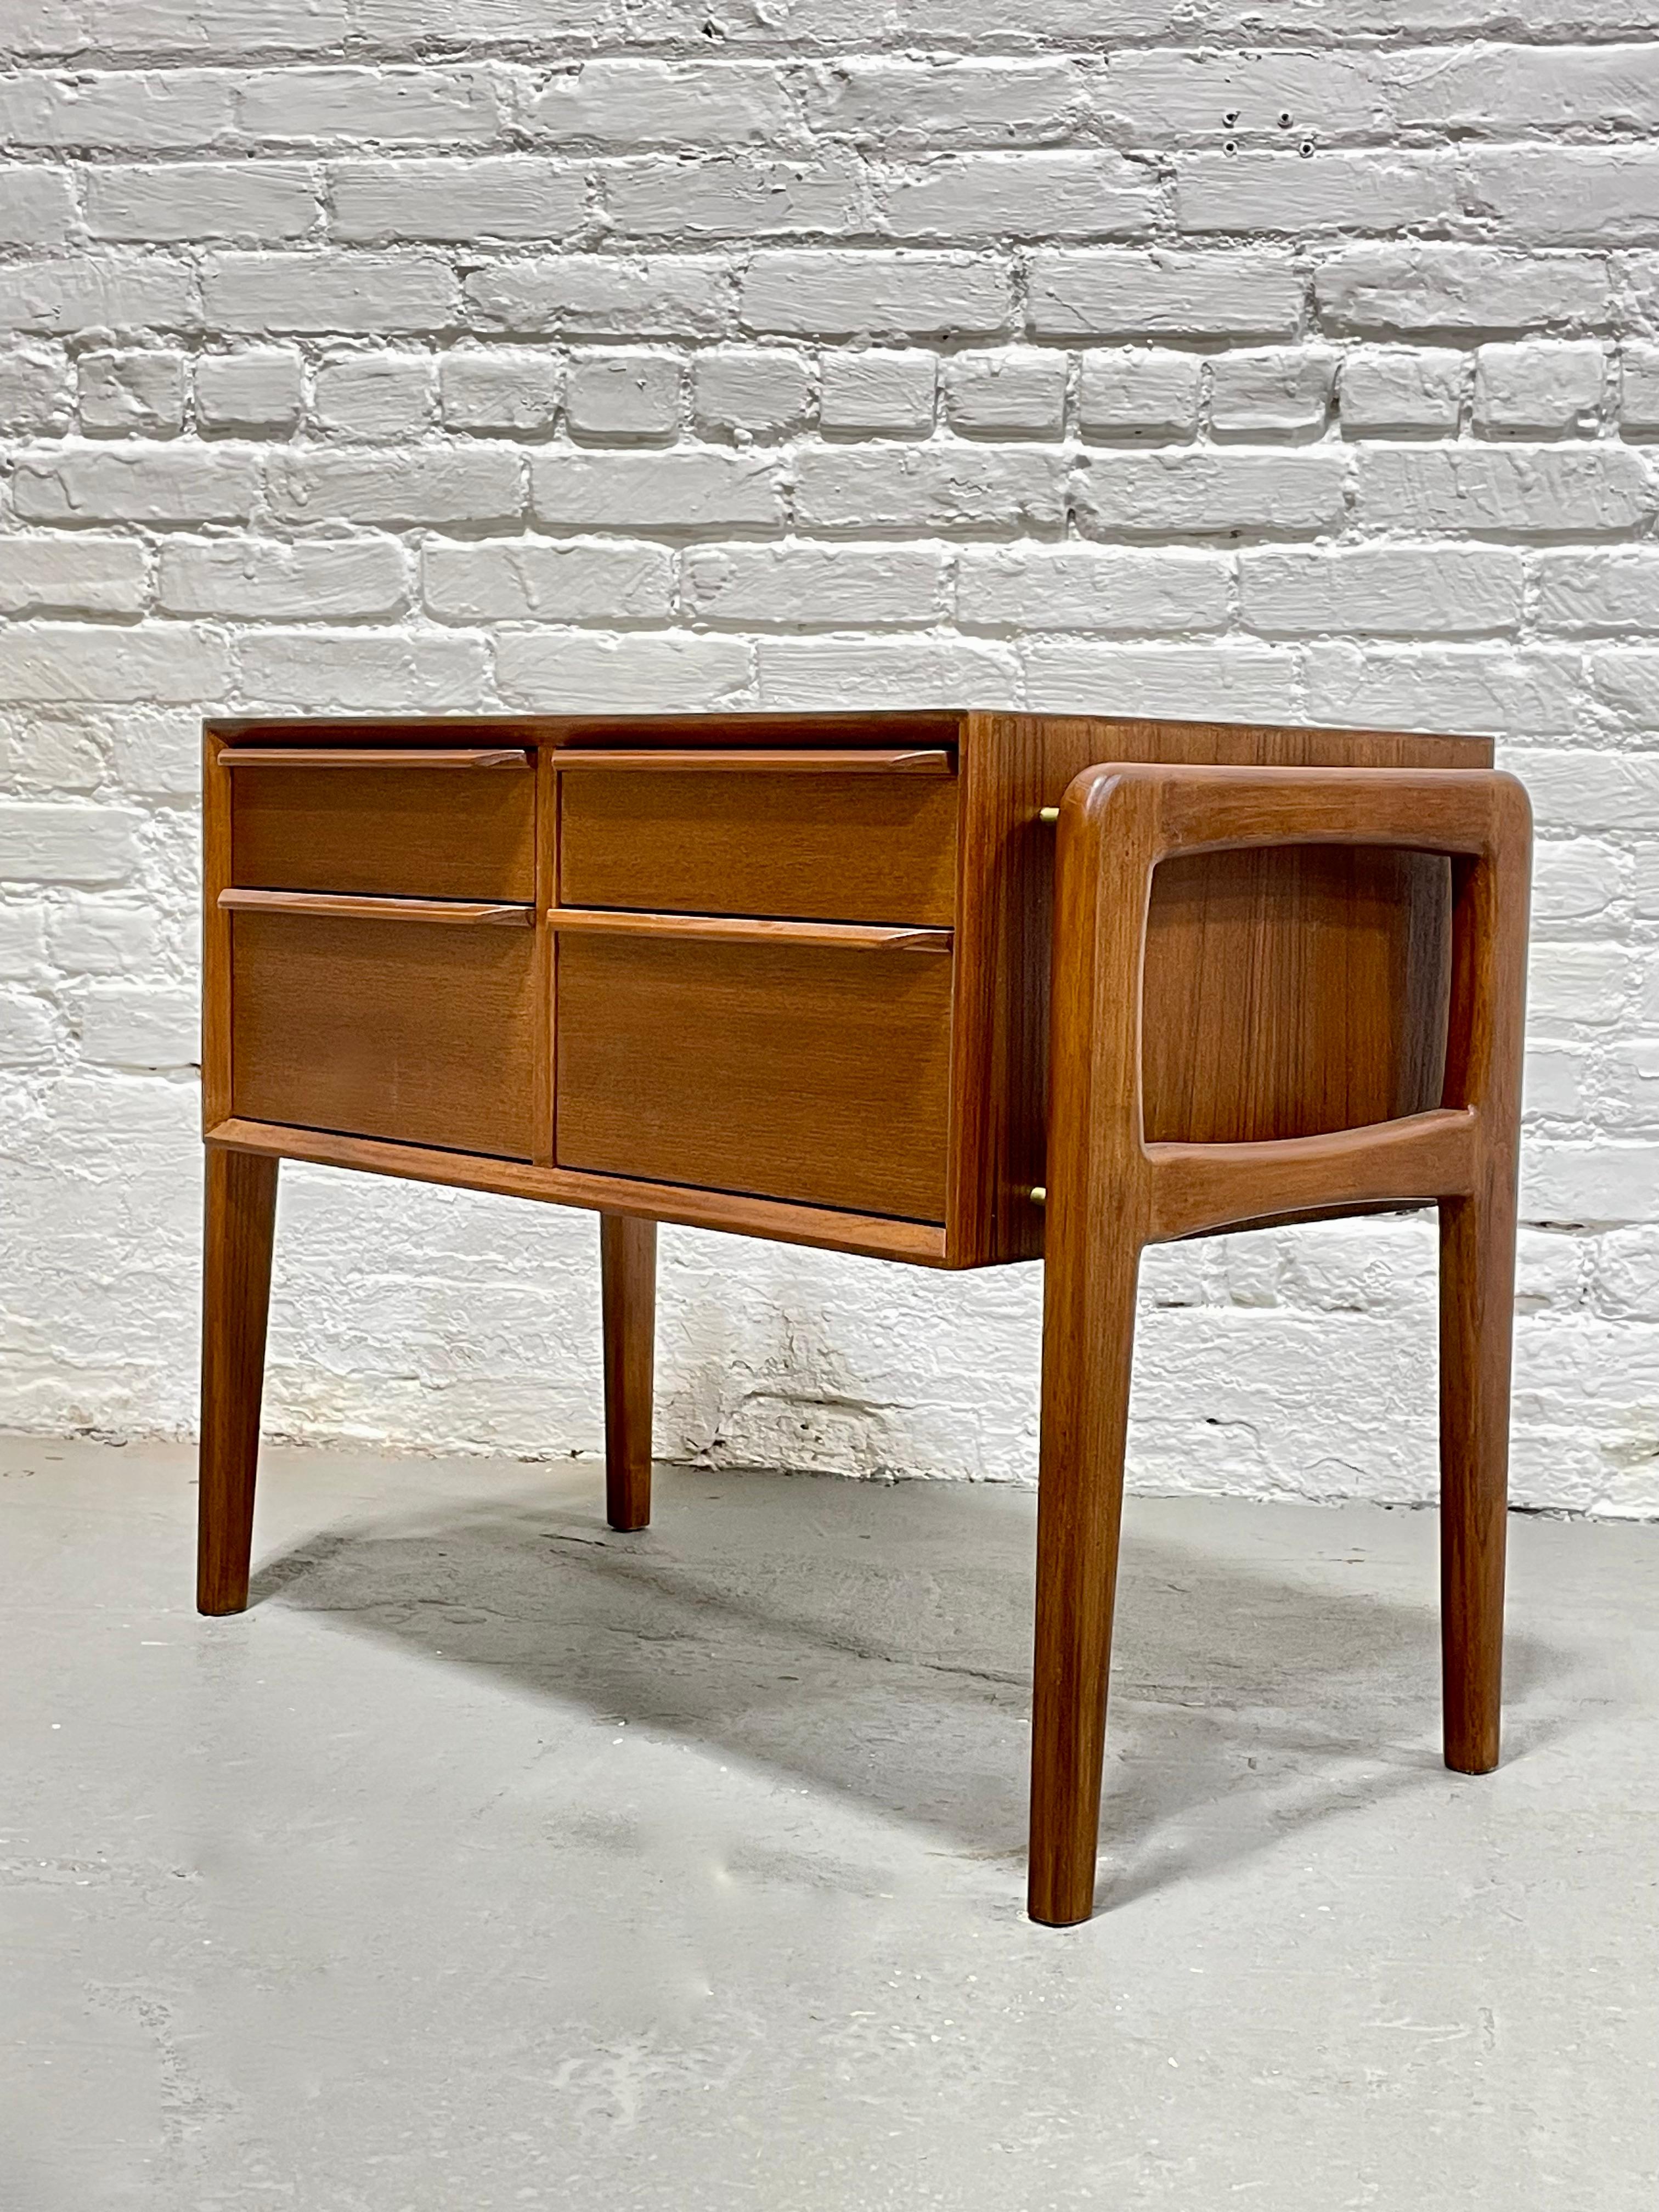 Perfect Mid-Century Modern styled cabinet, perfect as an entryway cabinet, bedside cabinet or storage cabinet. Loads of design details including sculpted hand pulls, brass hardware supporting 